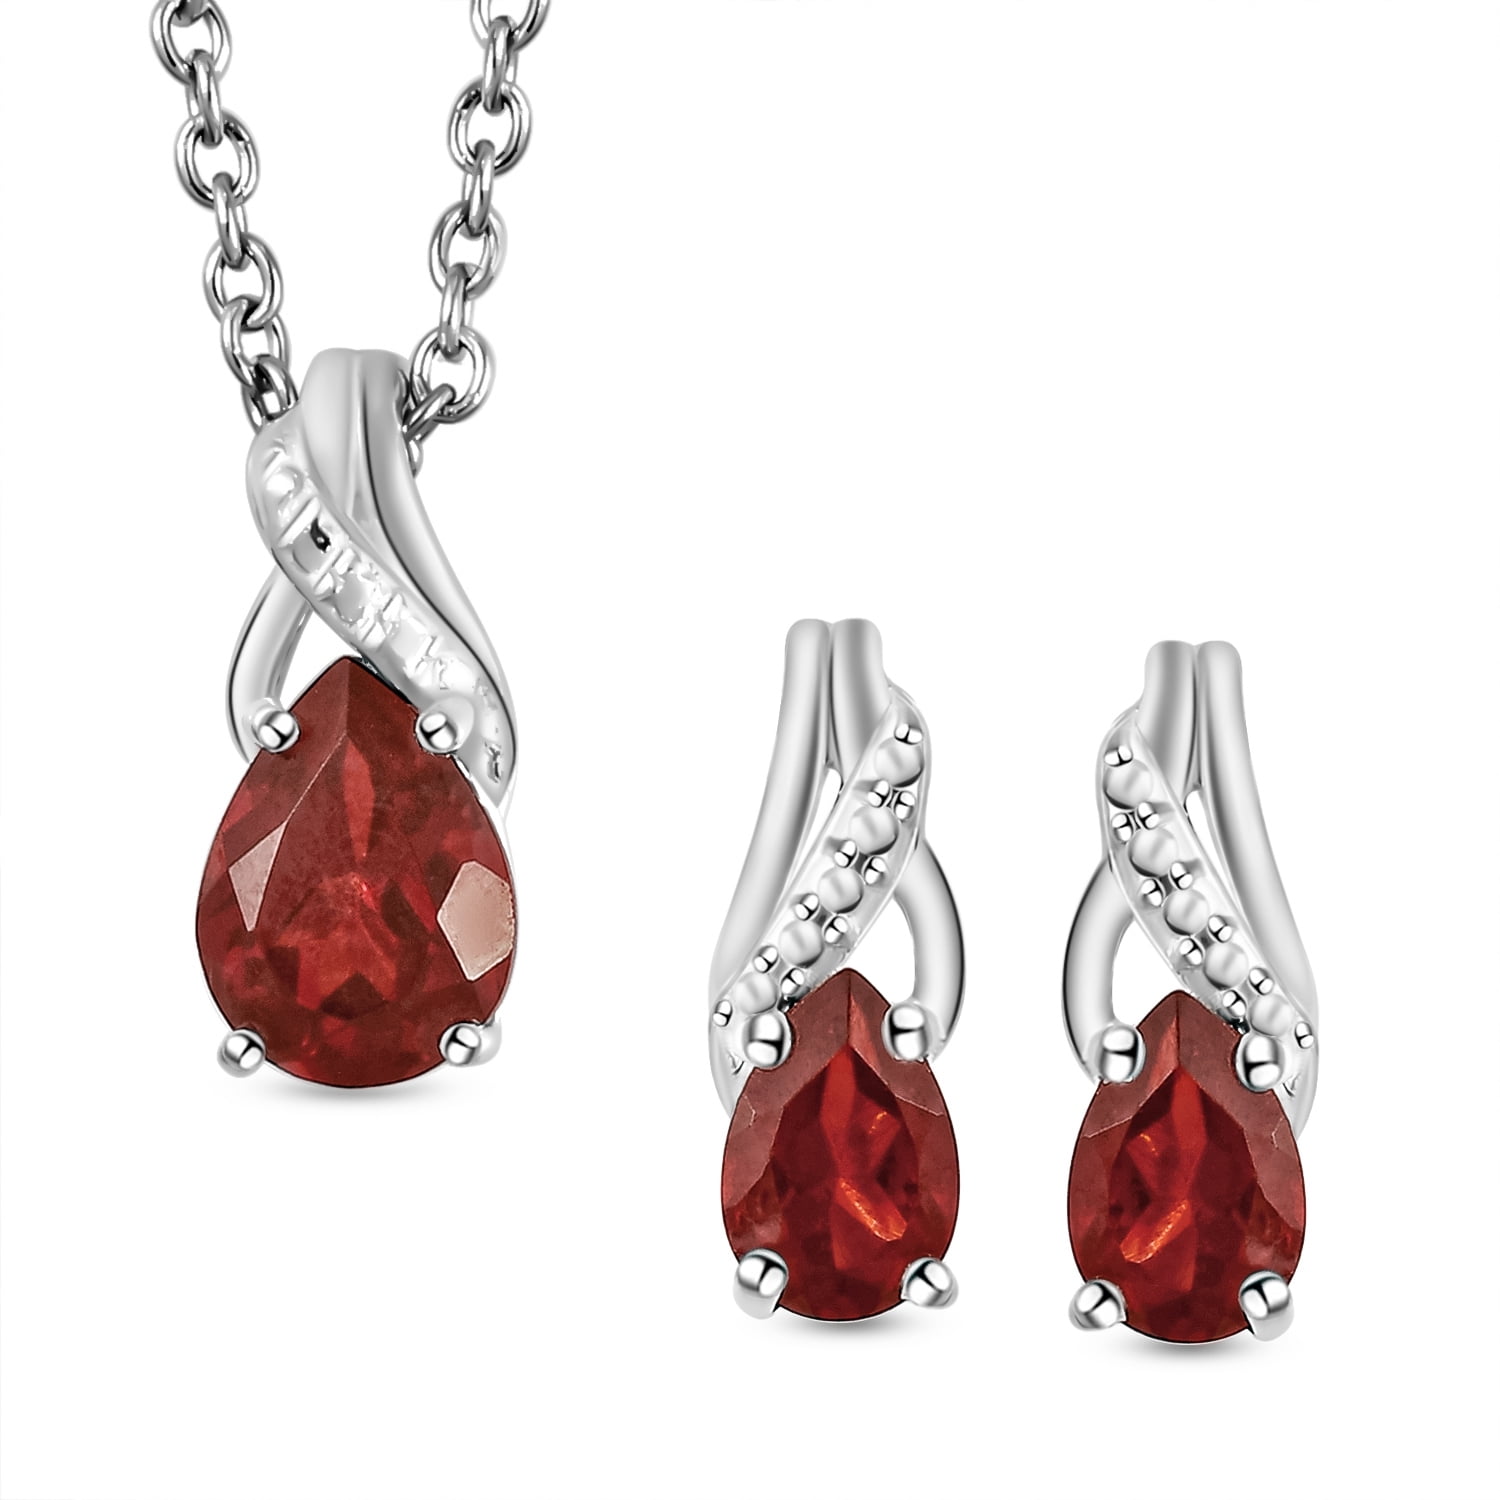 Suspension earrings and pendants with red gemstone fragments 925 silver